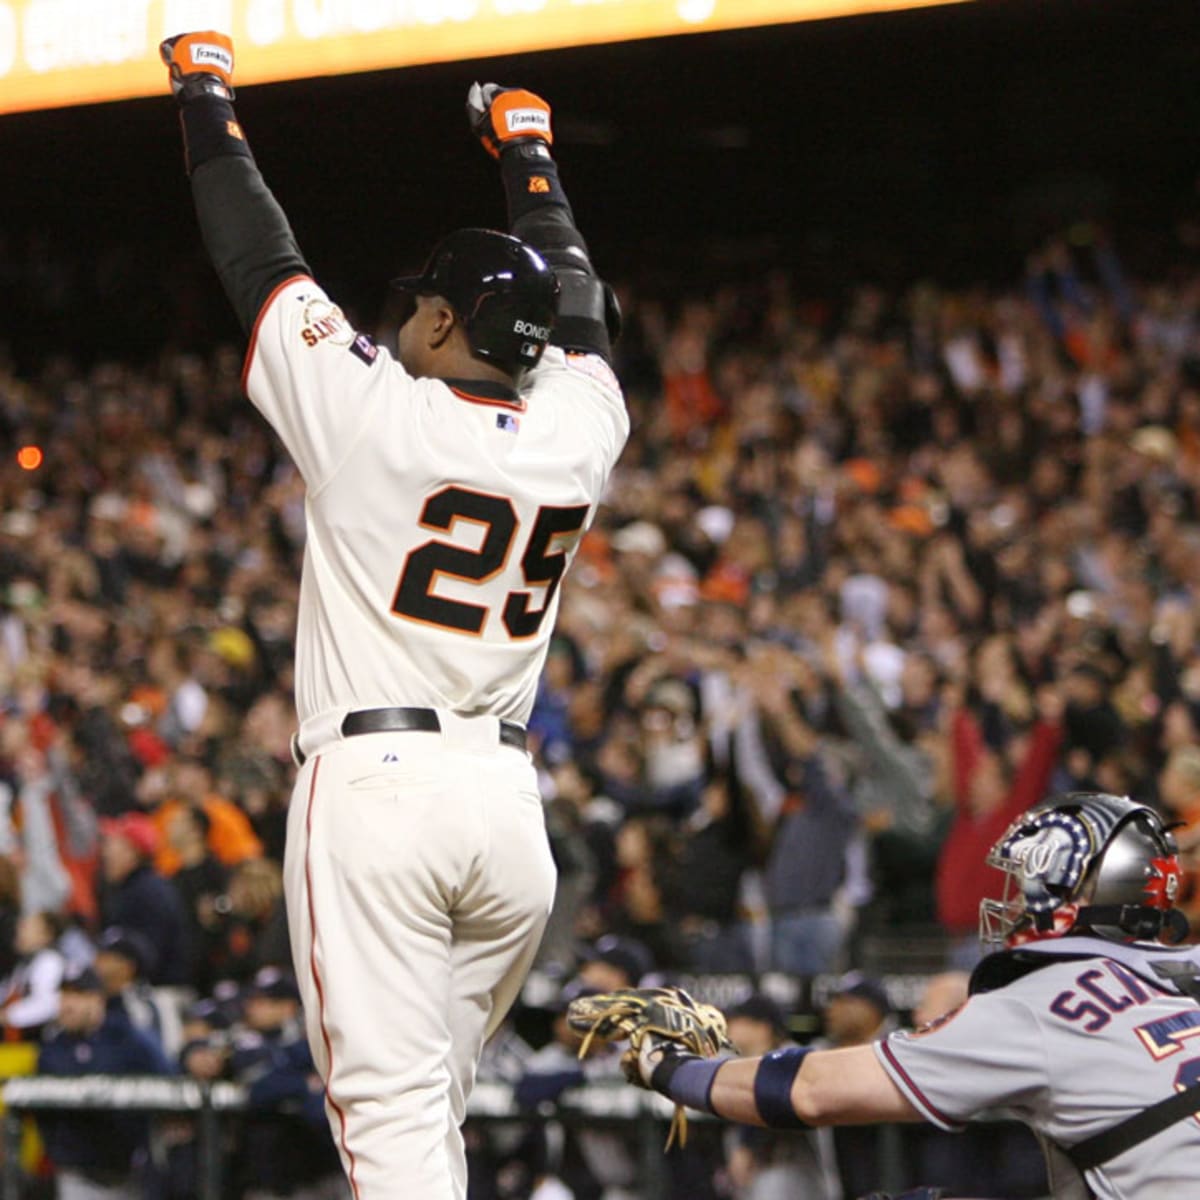 Bonds Hits No. 756 to Break Aaron's Record - The New York Times